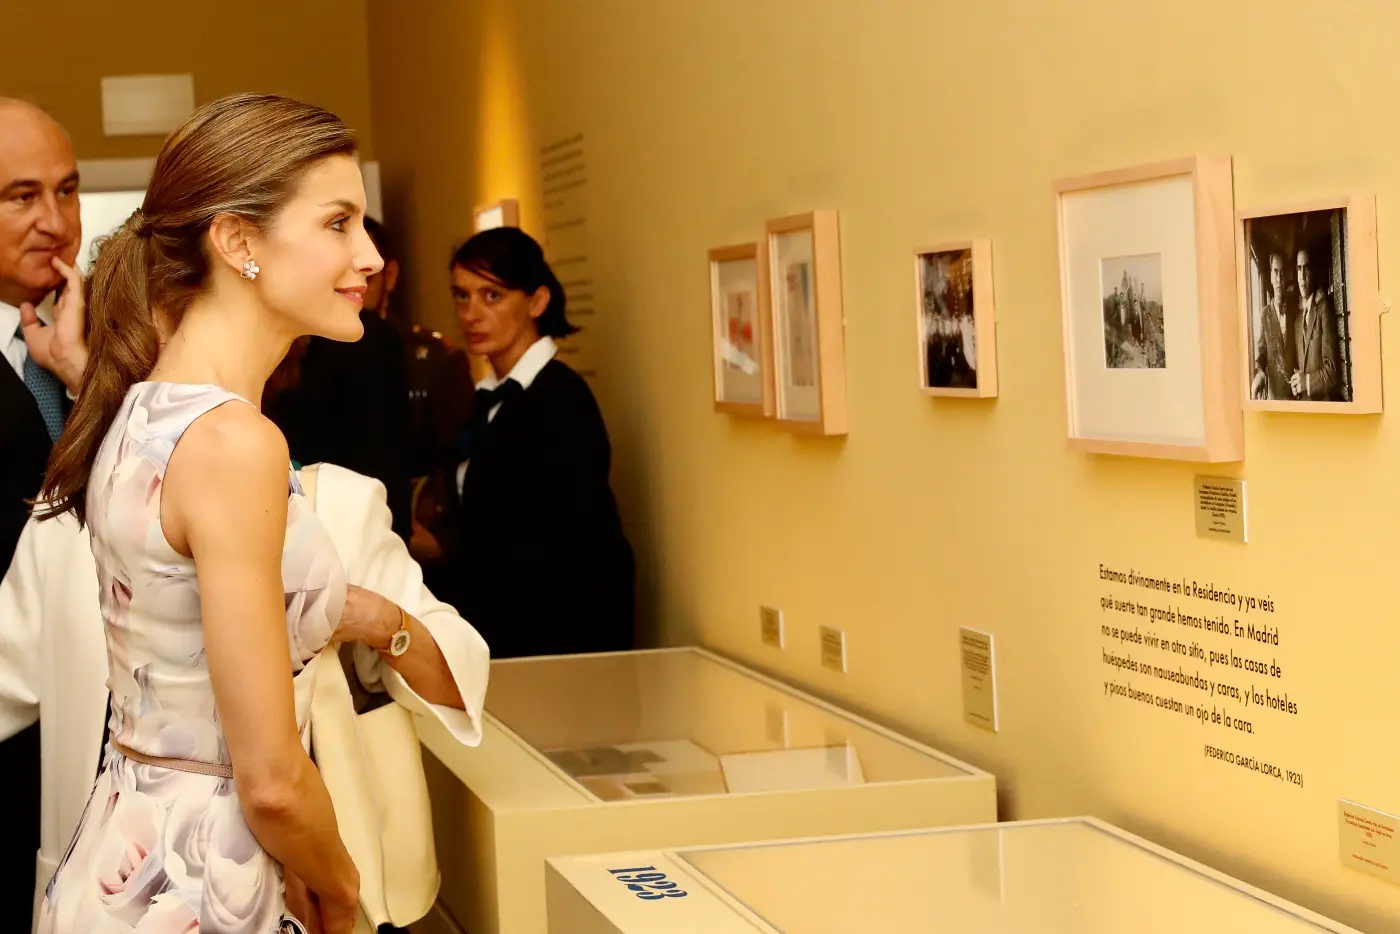 Queen Letizia presided the Board Meeting of Student Residence